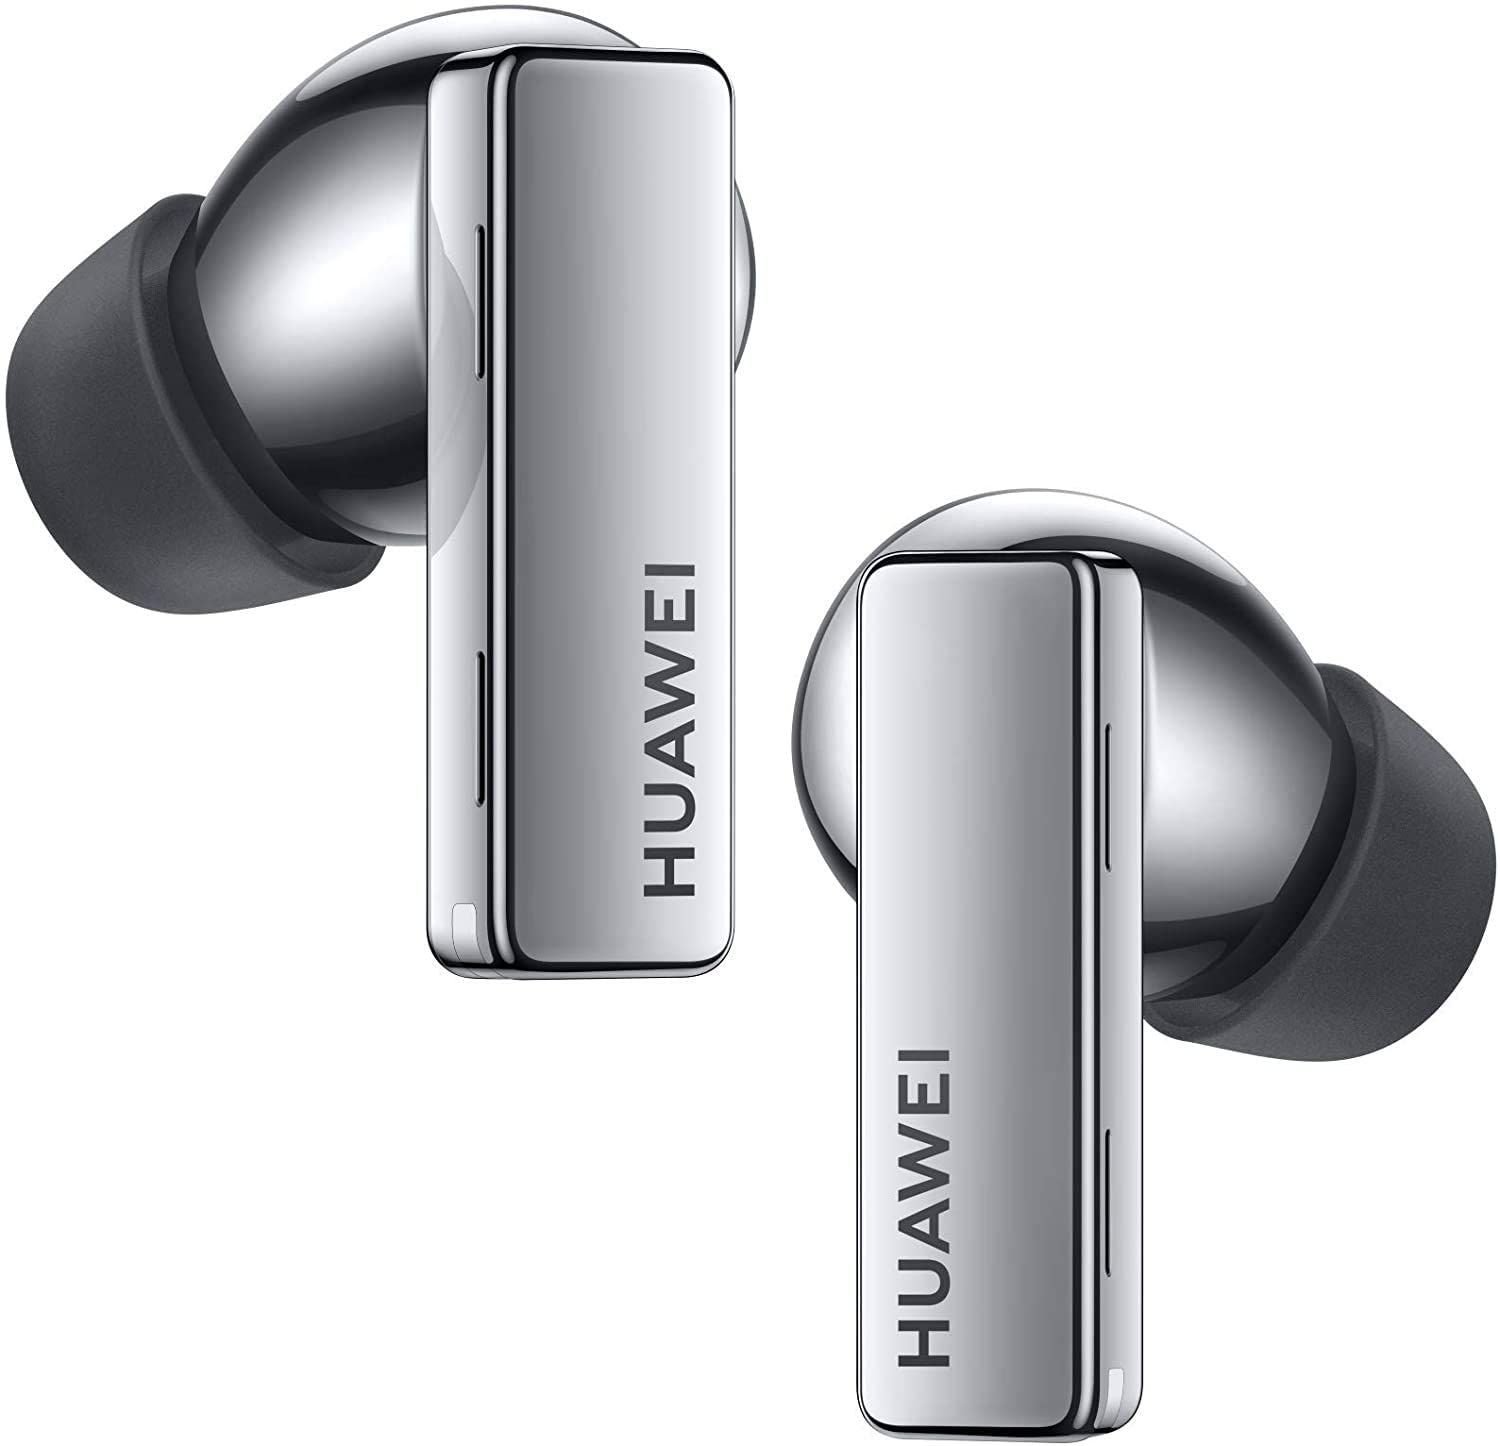 Huawei Freebuds Pro Active Noise Cancellation Earbuds